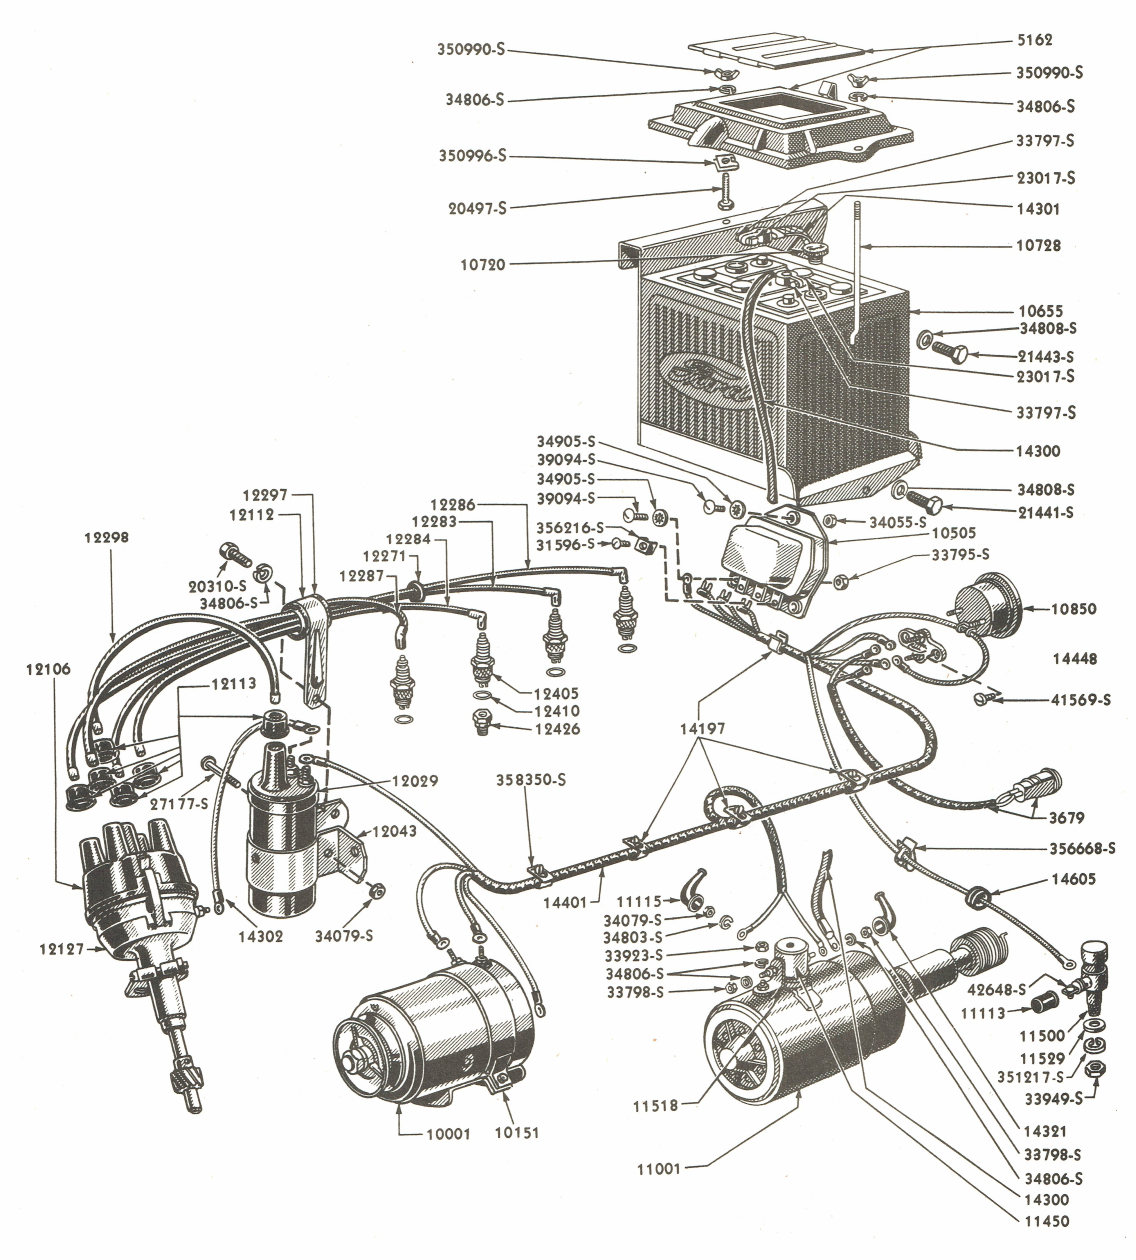 5000 Ford Tractor Electrical Wiring Diagram Full Hd Version